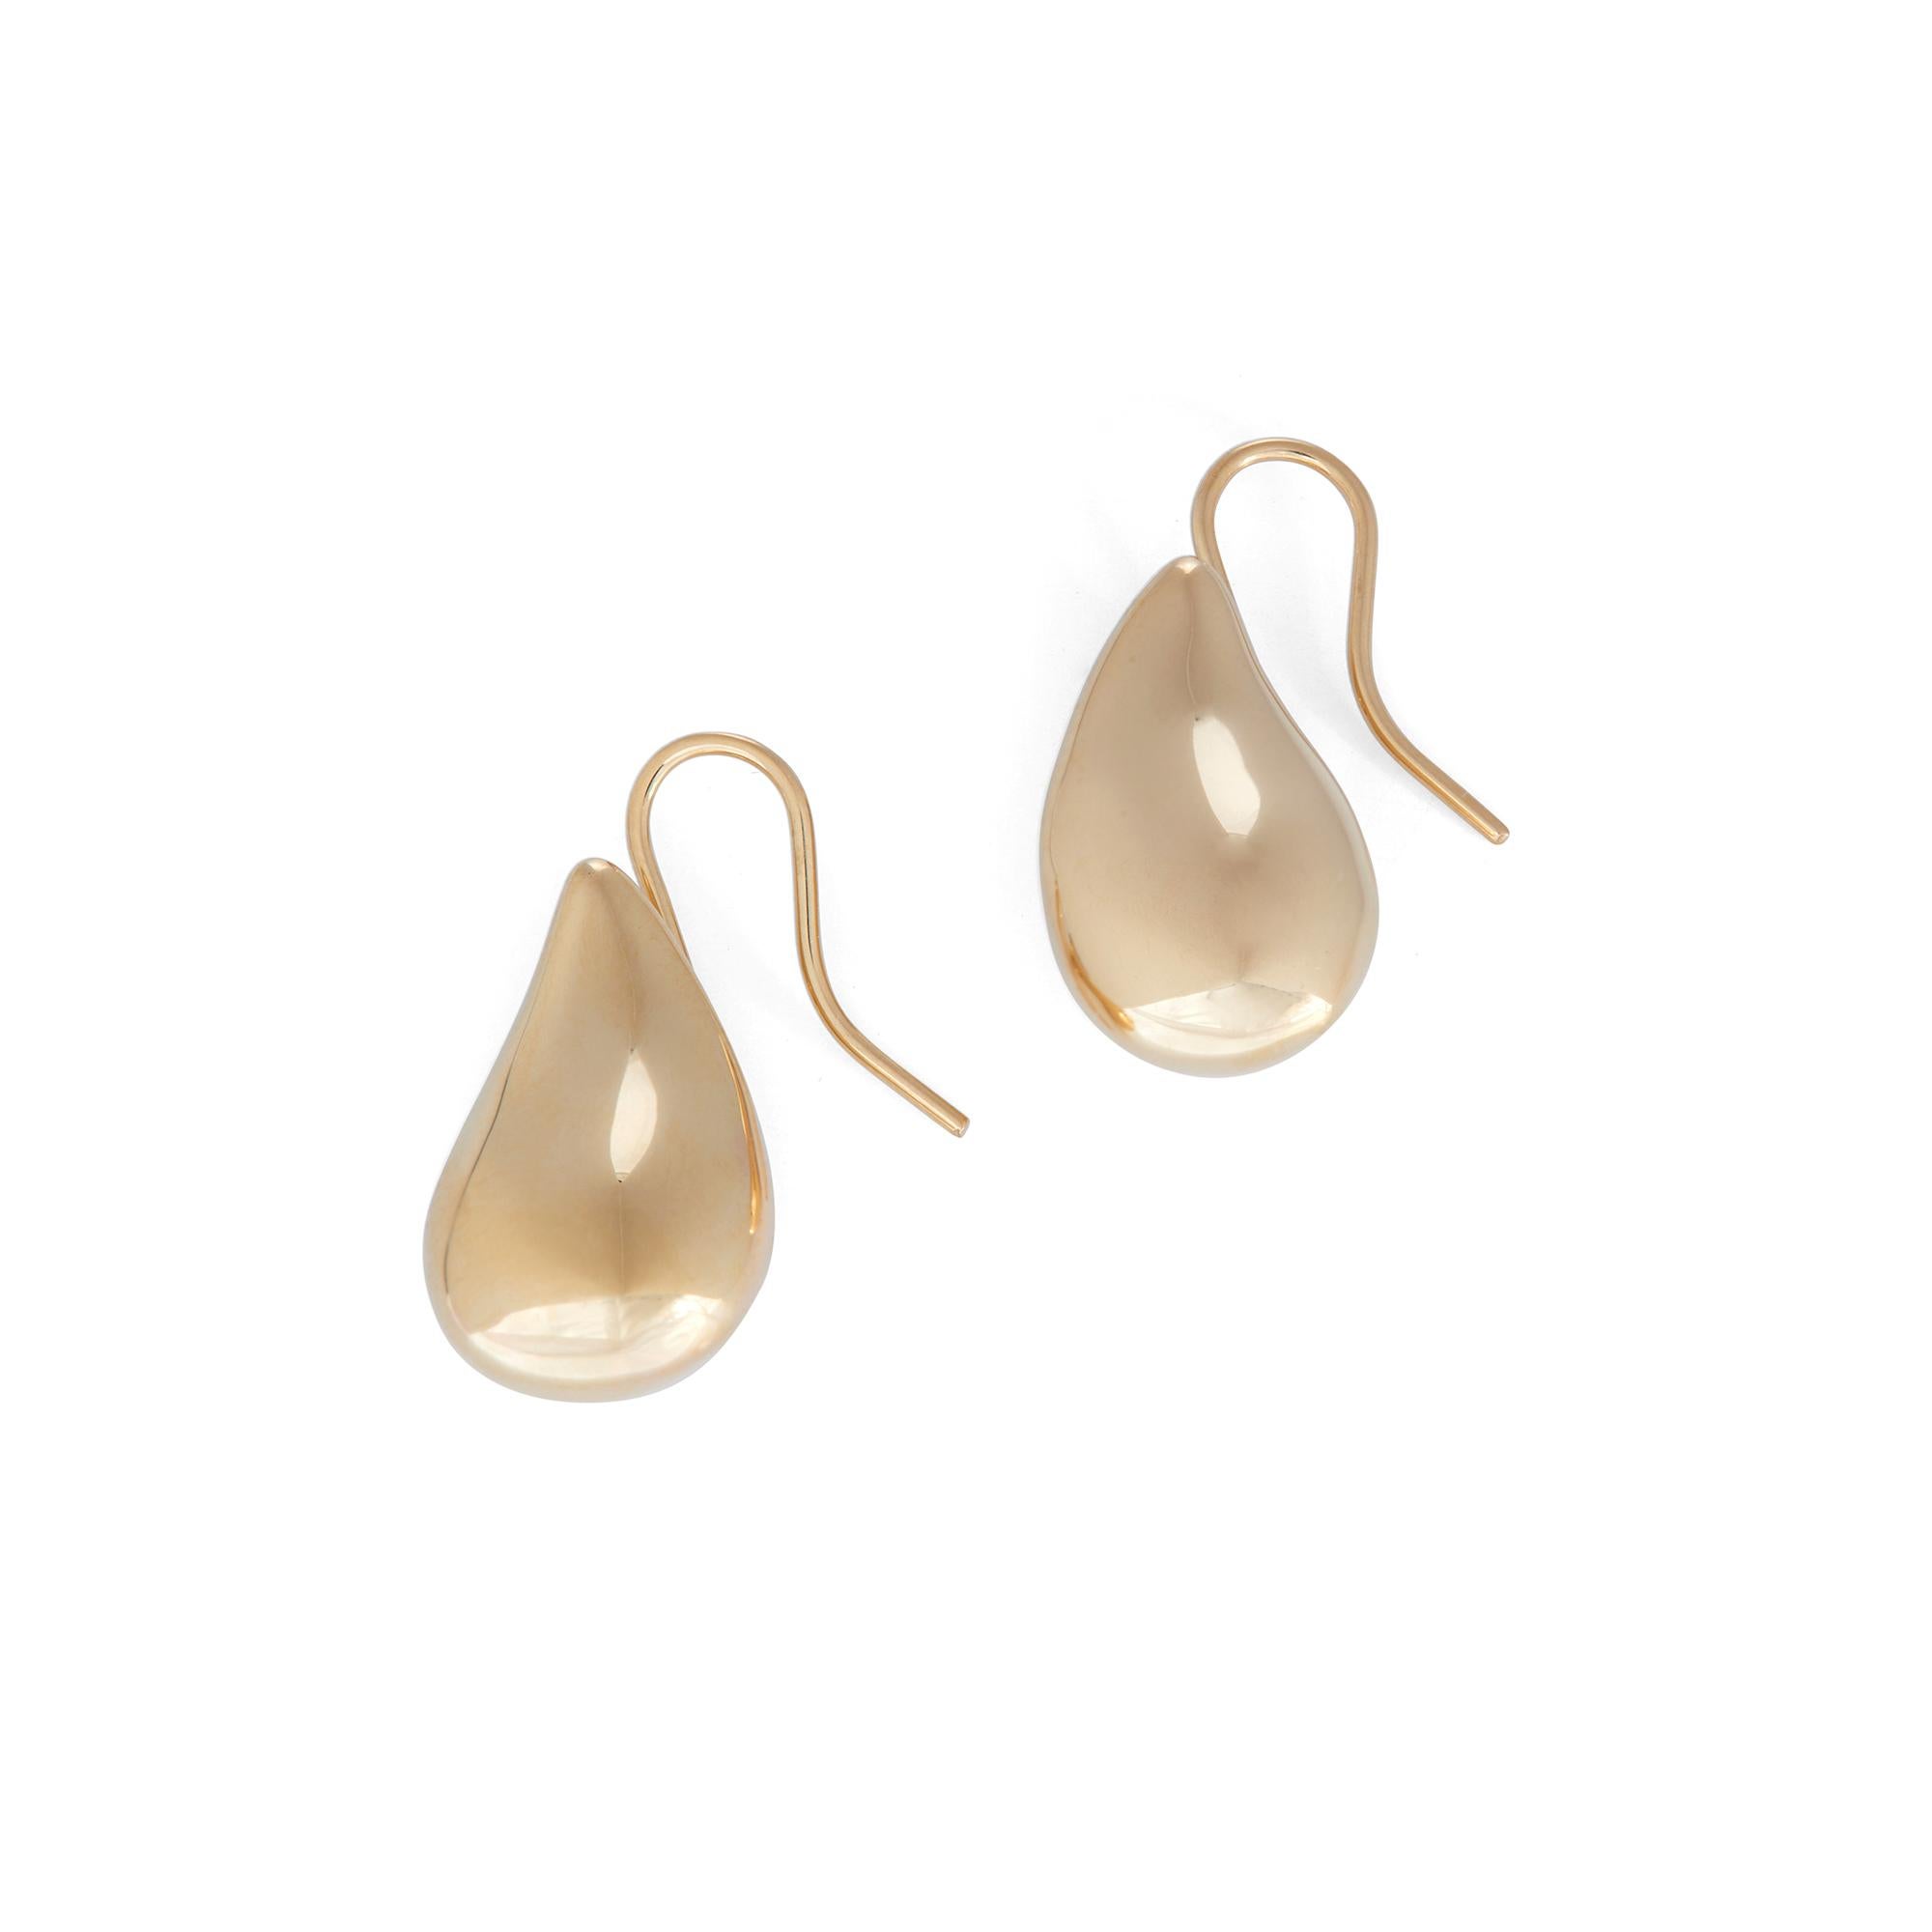 Authentic Elsa Peretti for Tiffany & Co. Teardrop earrings crafted in 18 karat high polished gold.  The teardrops measure 3/4 inches in length with French wire backs.  Signed Tiffany & Co., Peretti, 750.  Earrings are presented with a tiffany pouch,